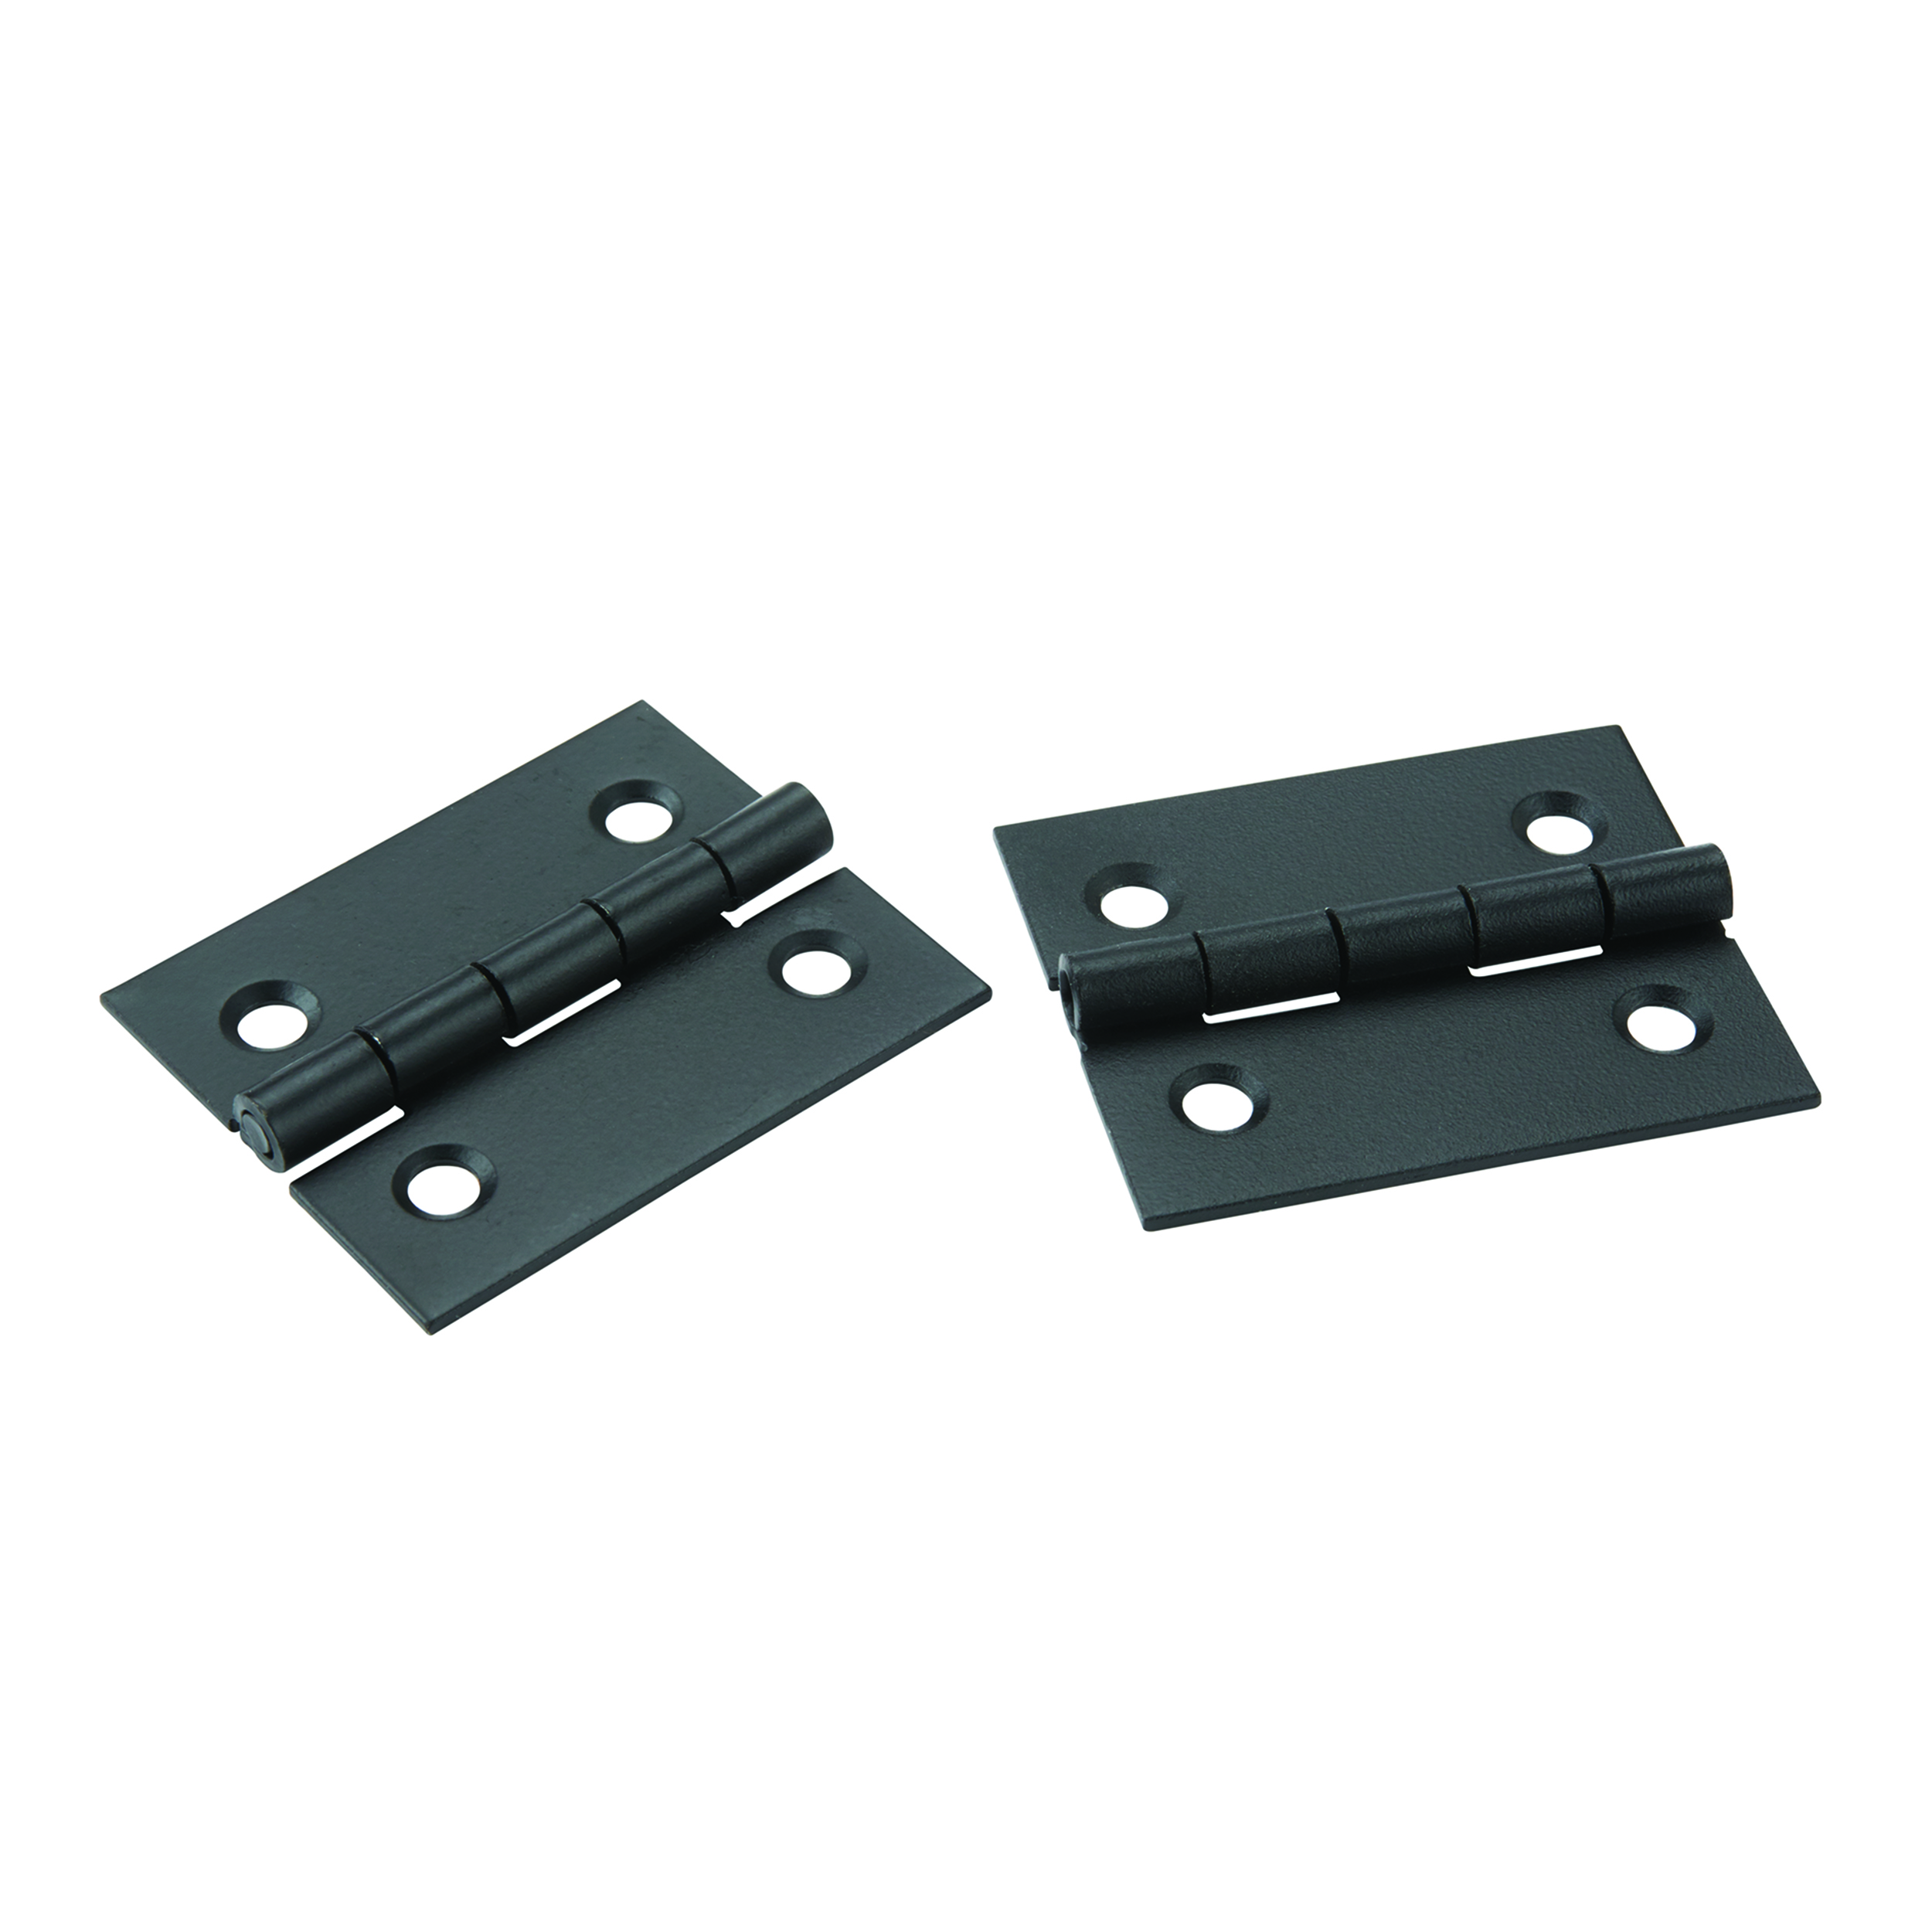 Miniature Narrow Hinge 1-1/2" Long X 1-1/4" Open Oil Rubbed Bronze With Screws, Pair